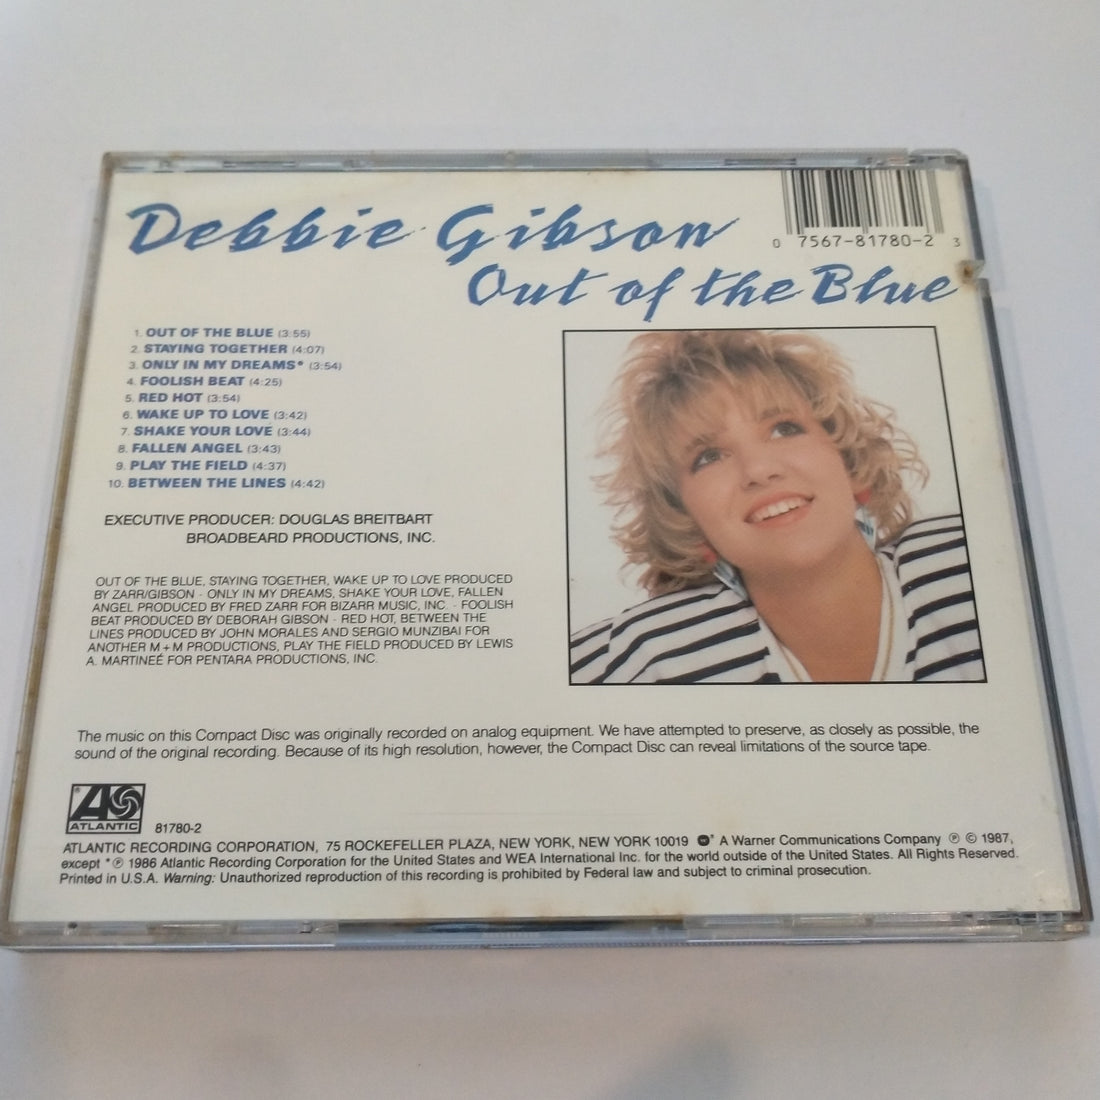 Debbie Gibson - Out Of The Blue (CD) (VG)